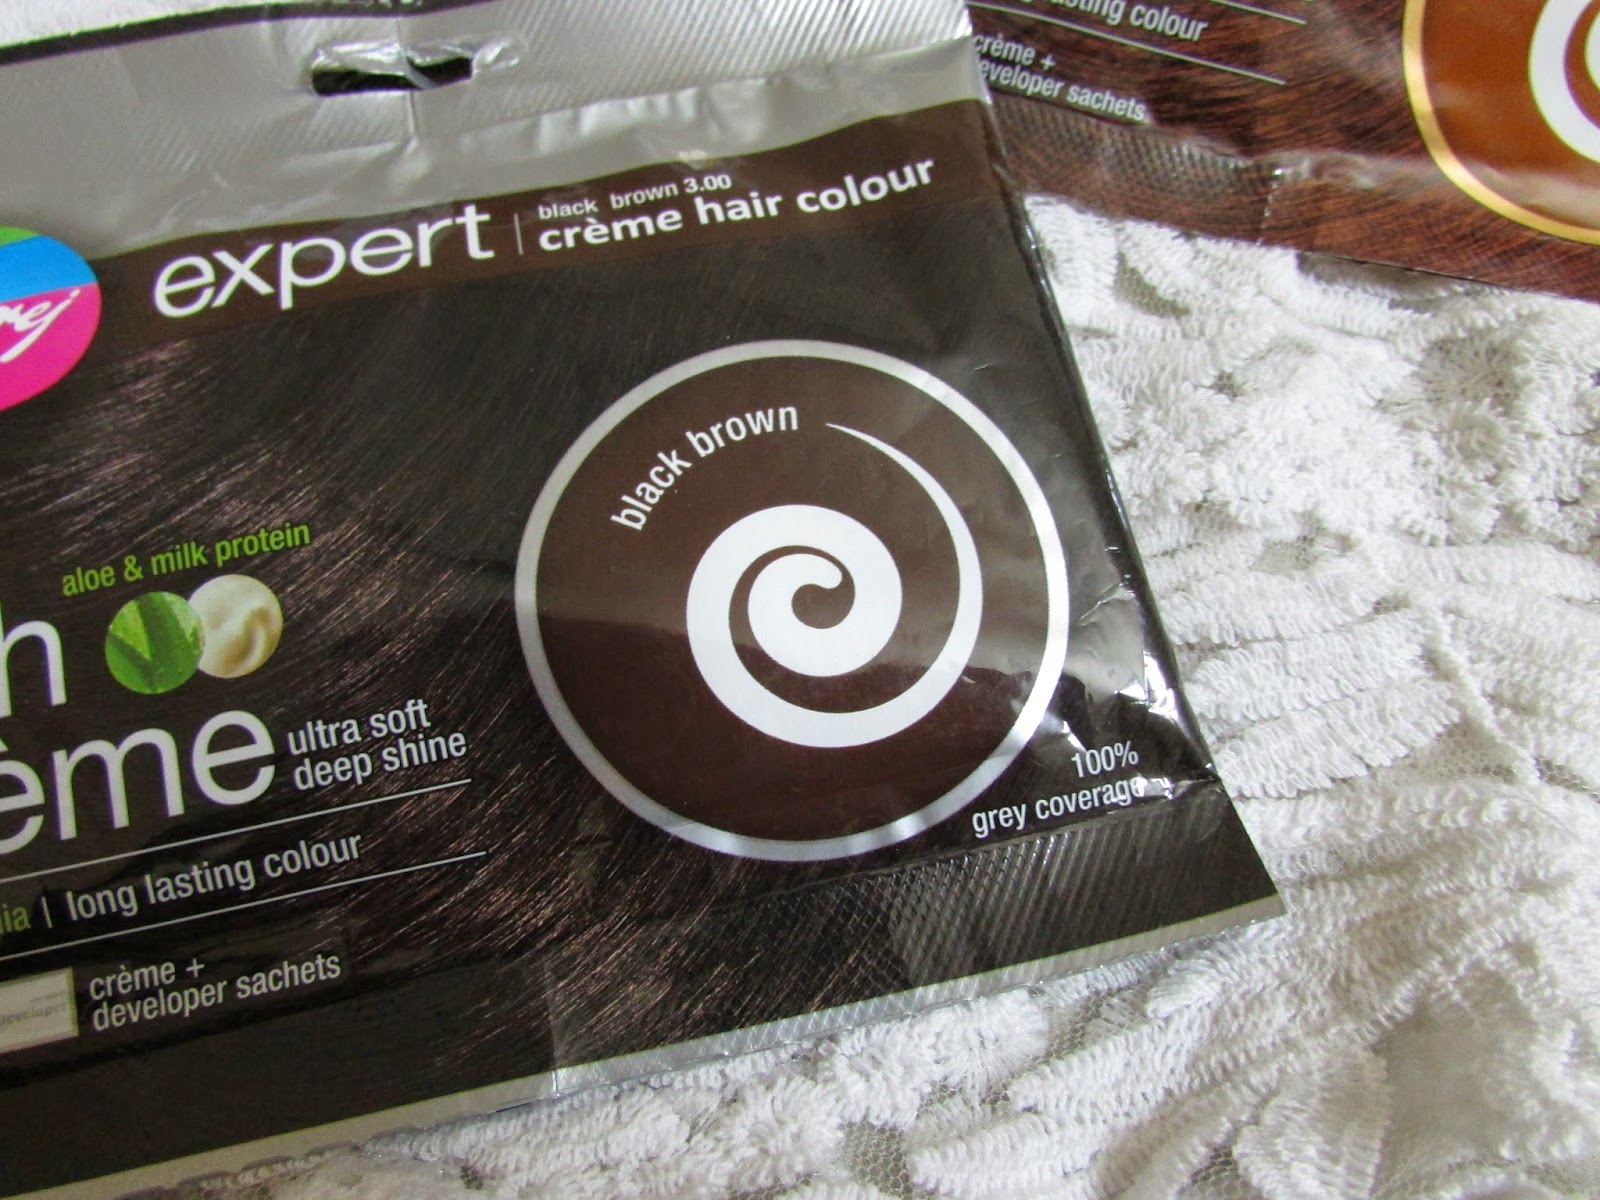 Godrej Expert Rich Creme Hair Colour Review | Indian Beauty Diary